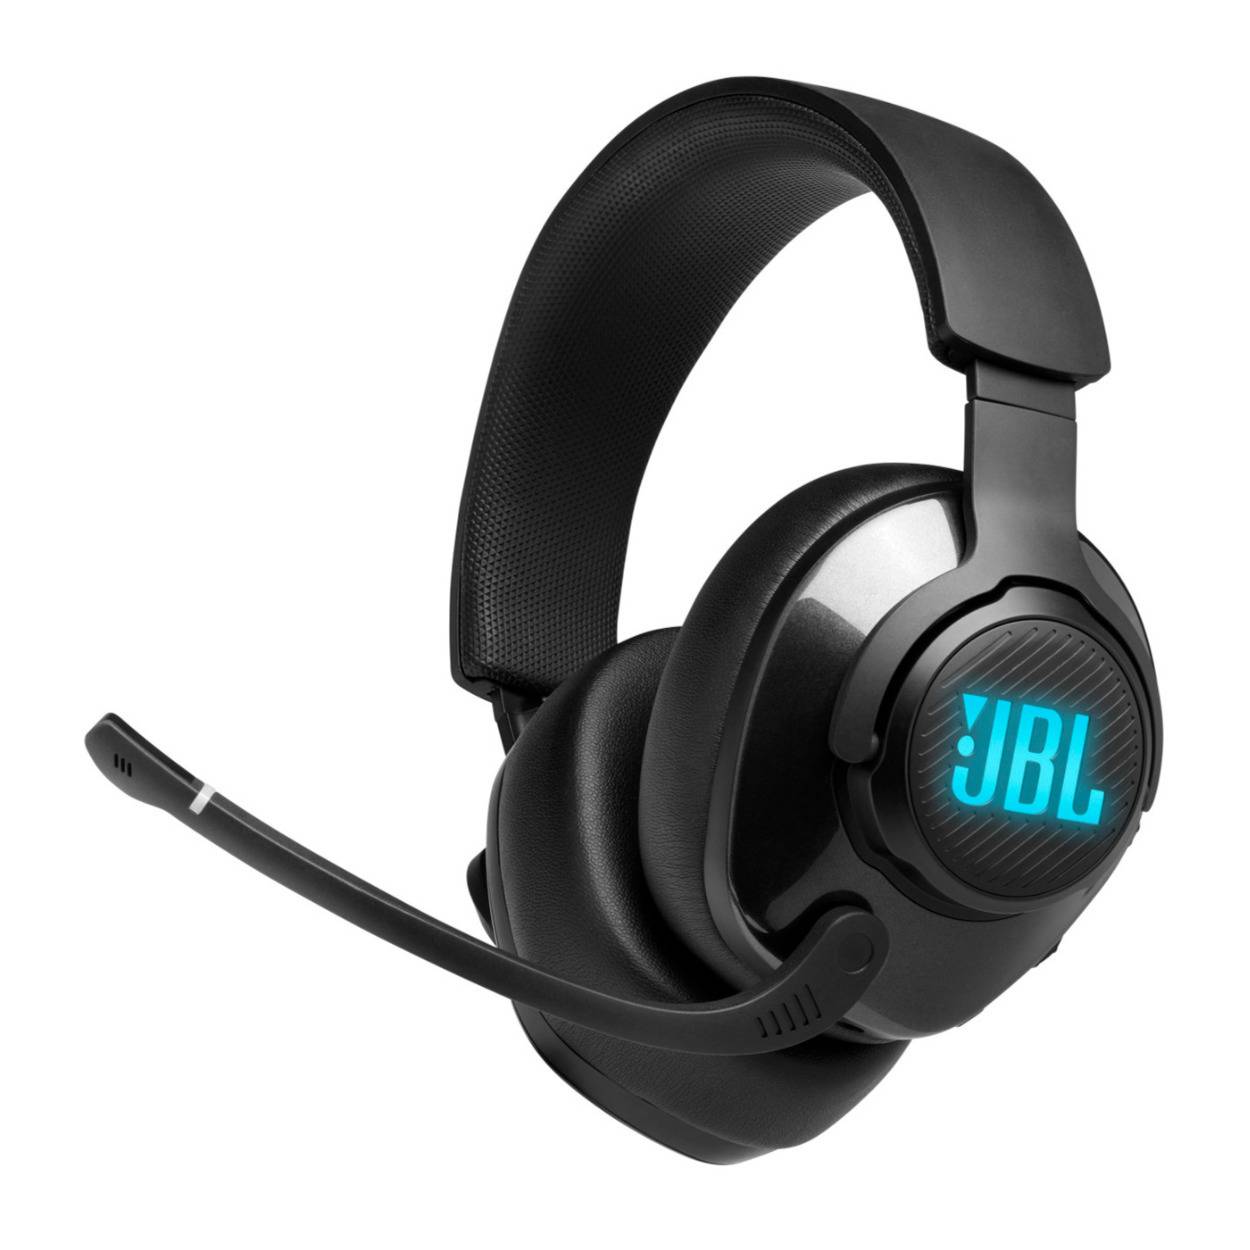 JBL Quantum 400 Wired Over-Ear Gaming Headphones with USB and Game-Chat Balance Dial (Black)